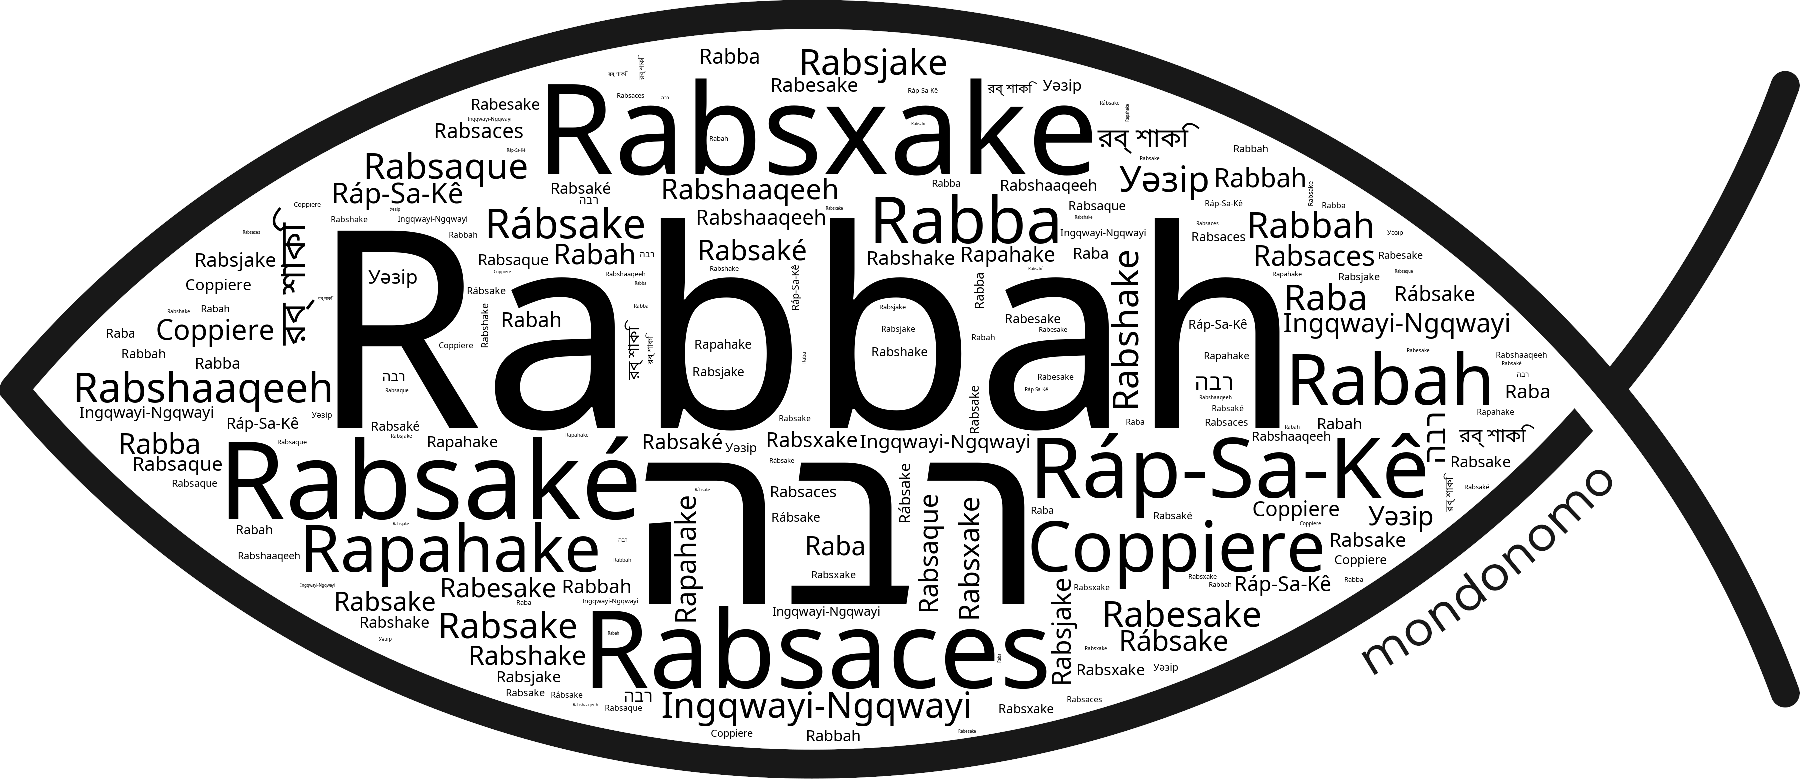 Name Rabbah in the world's Bibles